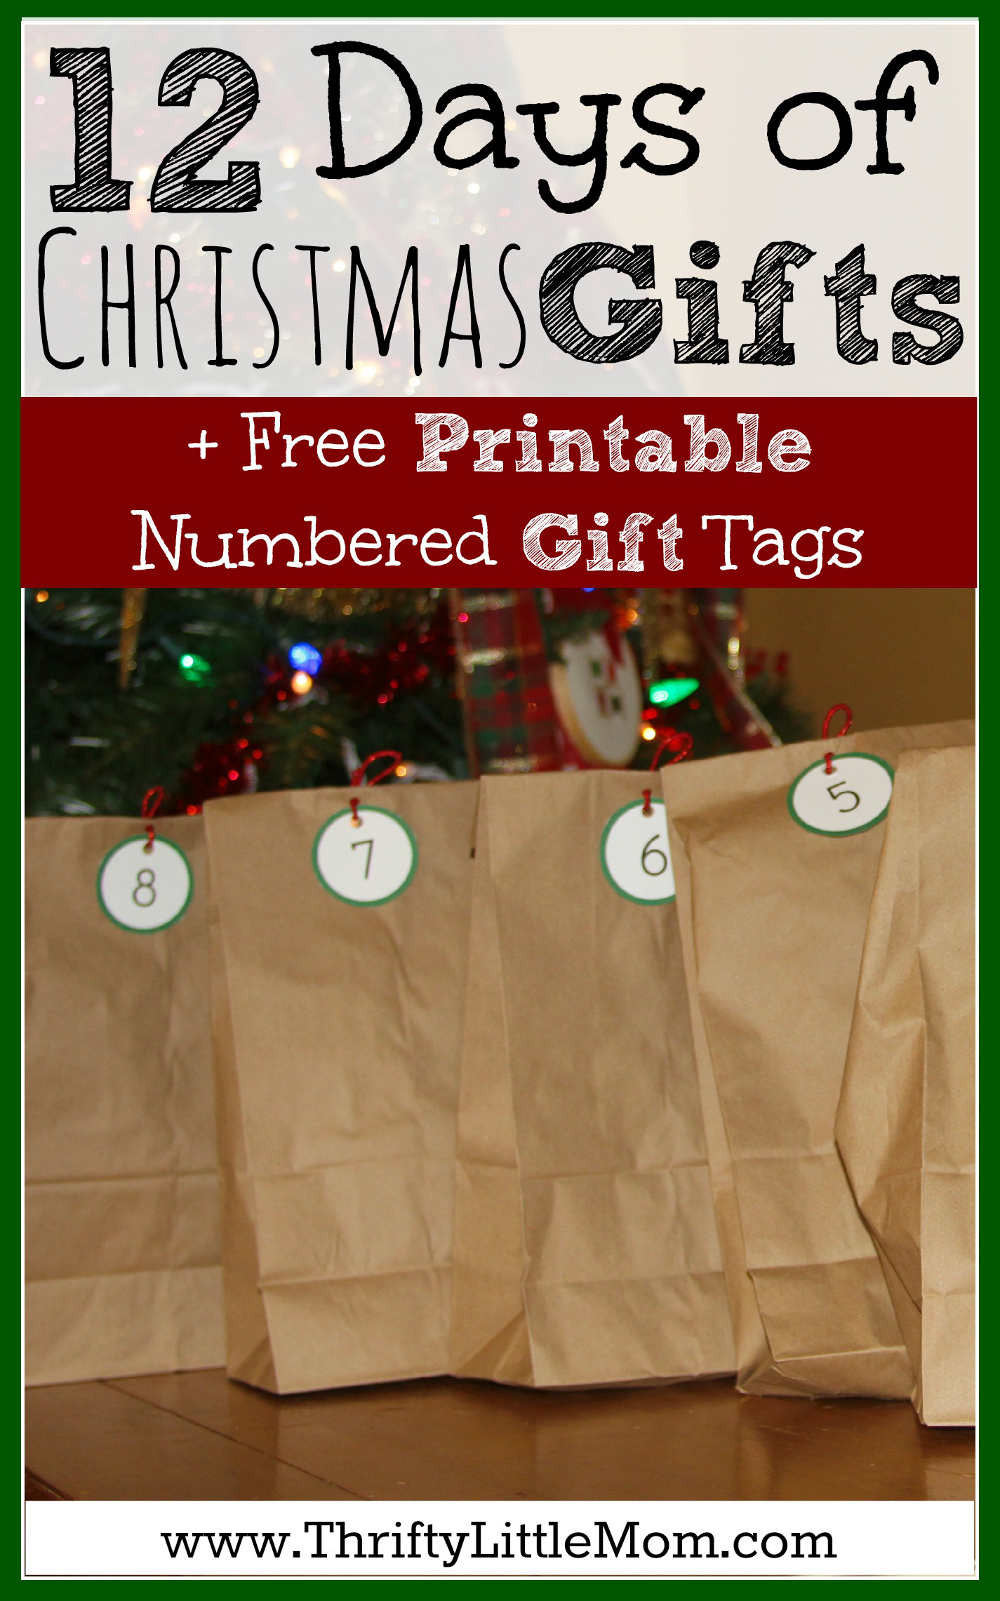 12 Days Of Christmas Gifts For Kids
 The 12 Days of Christmas Project Day 9 of Getting Into